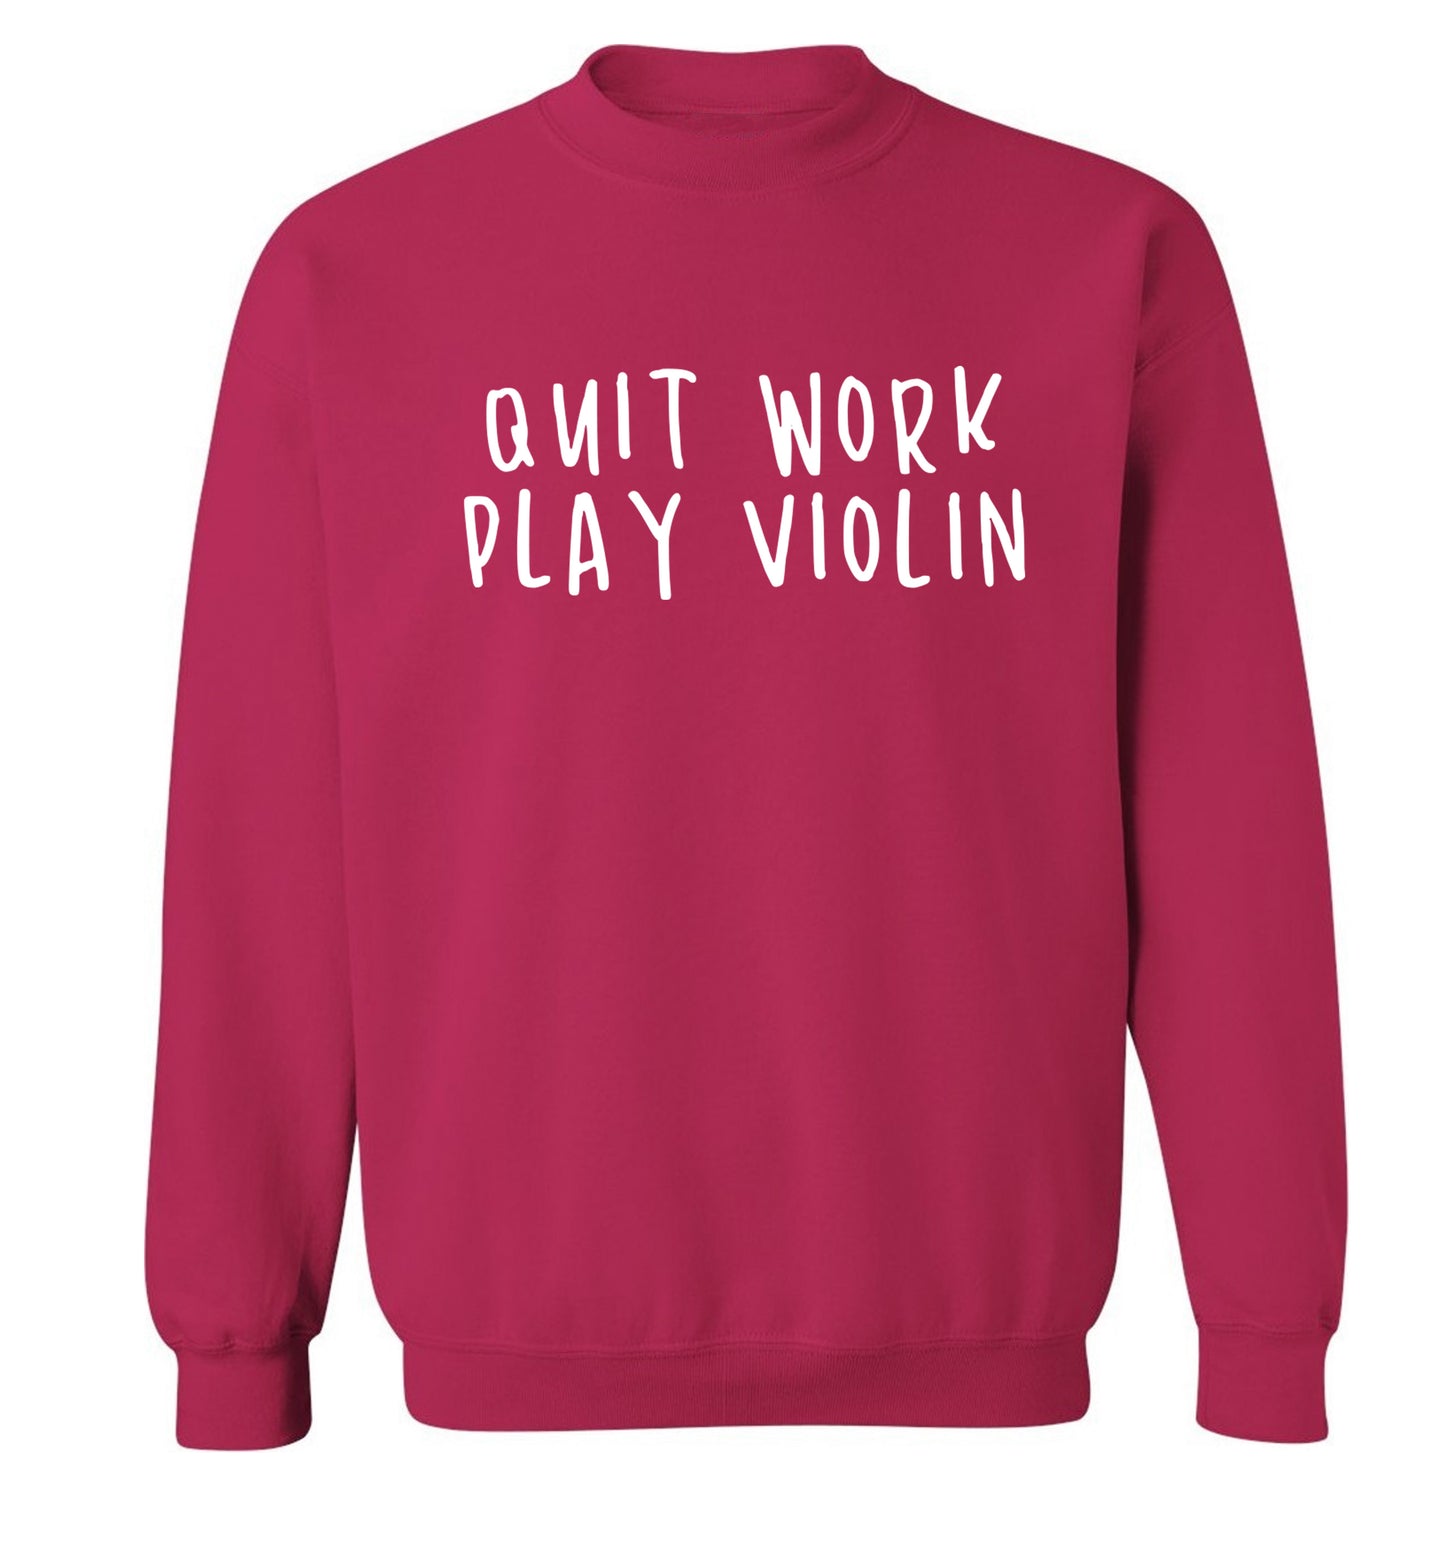 Quit work play violin Adult's unisex pink Sweater 2XL